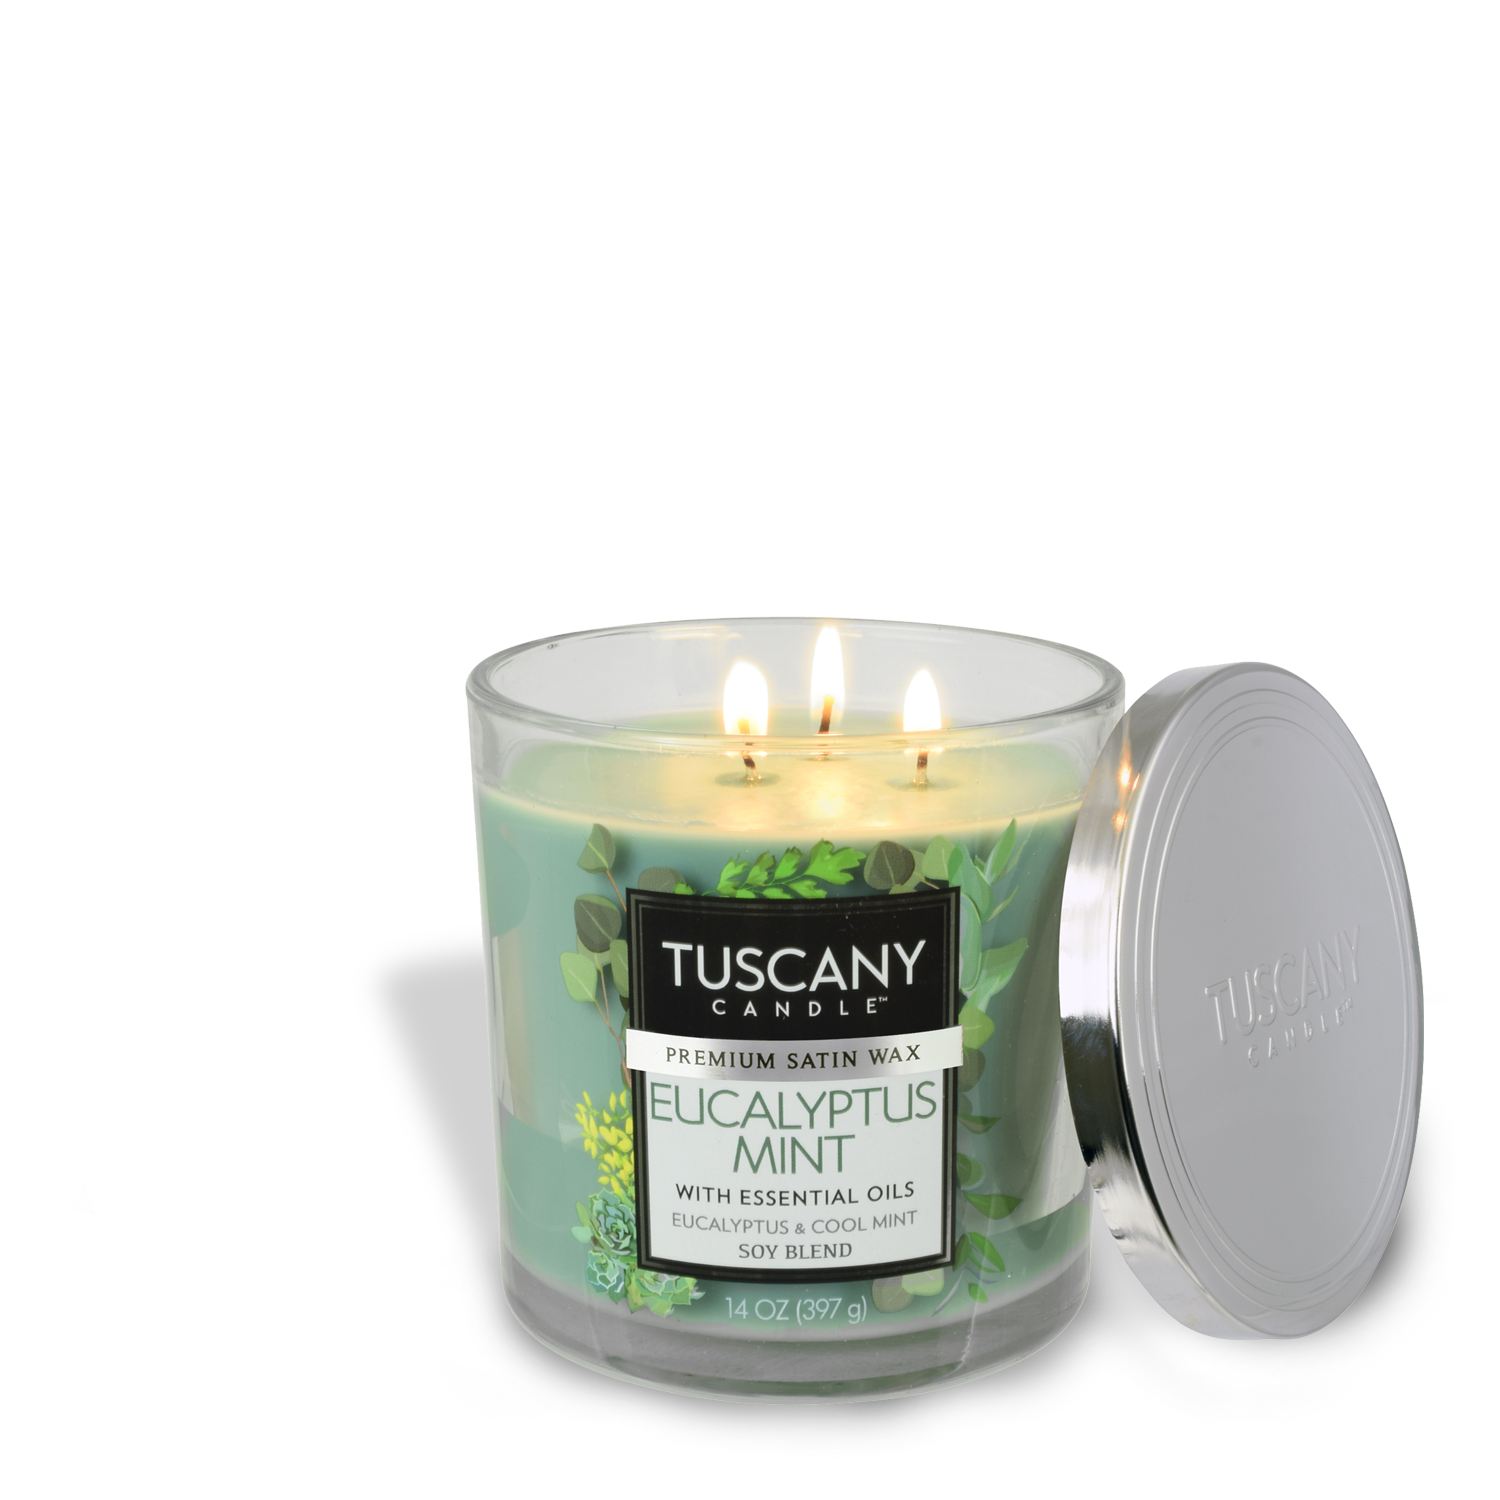 Experience the refreshing aroma of Tuscany with our Eucalyptus Mint Long-Lasting Scented Jar Candle (14 oz), infused with eucalyptus mint from Tuscany Candle.